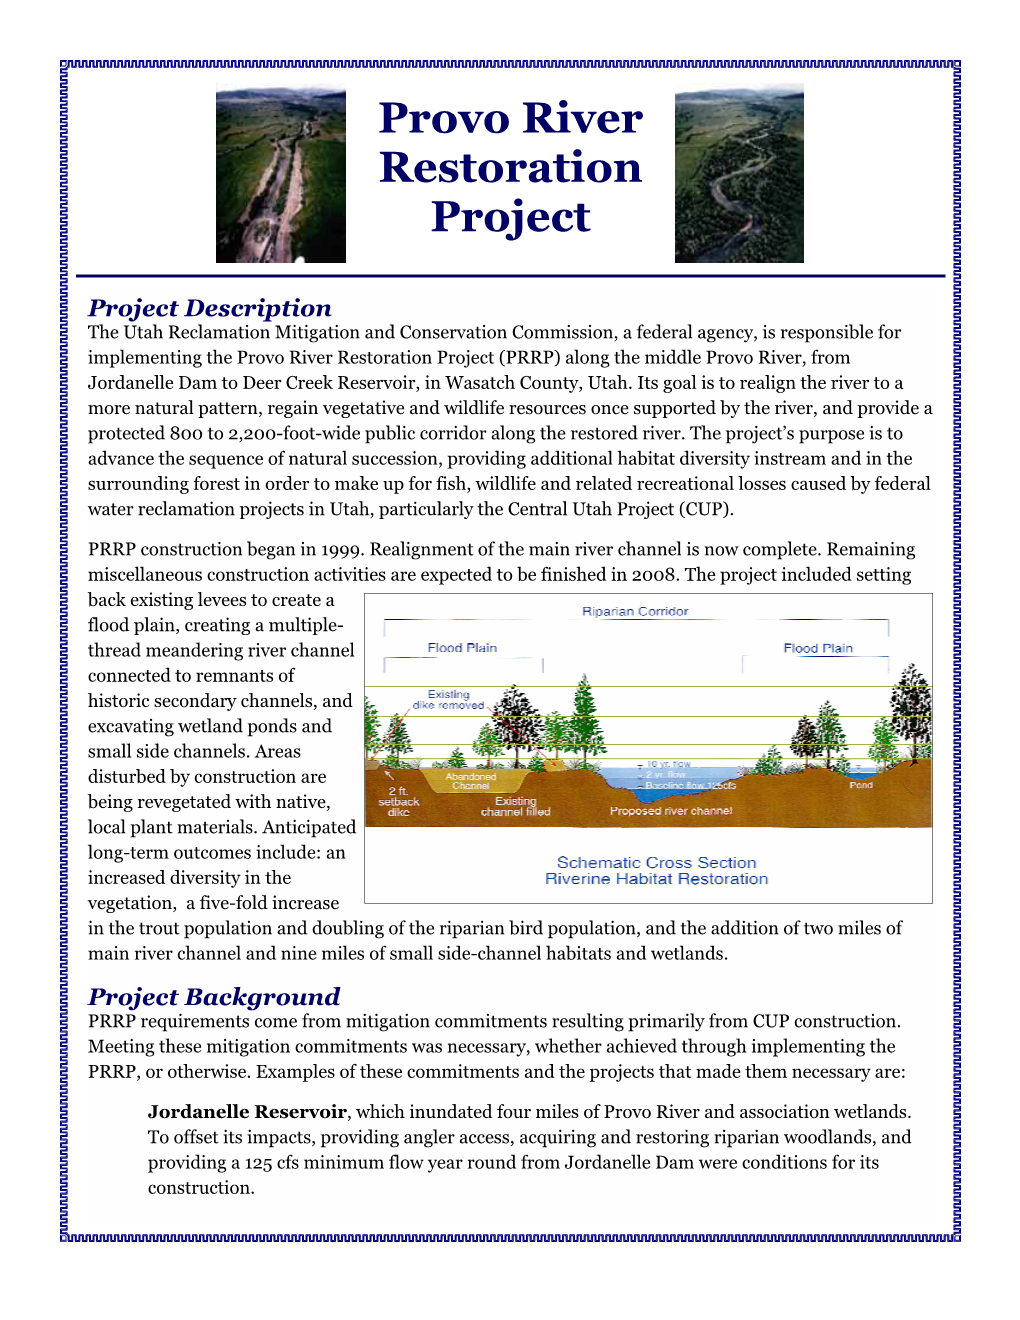 Provo River Restoration Project Fact Sheet